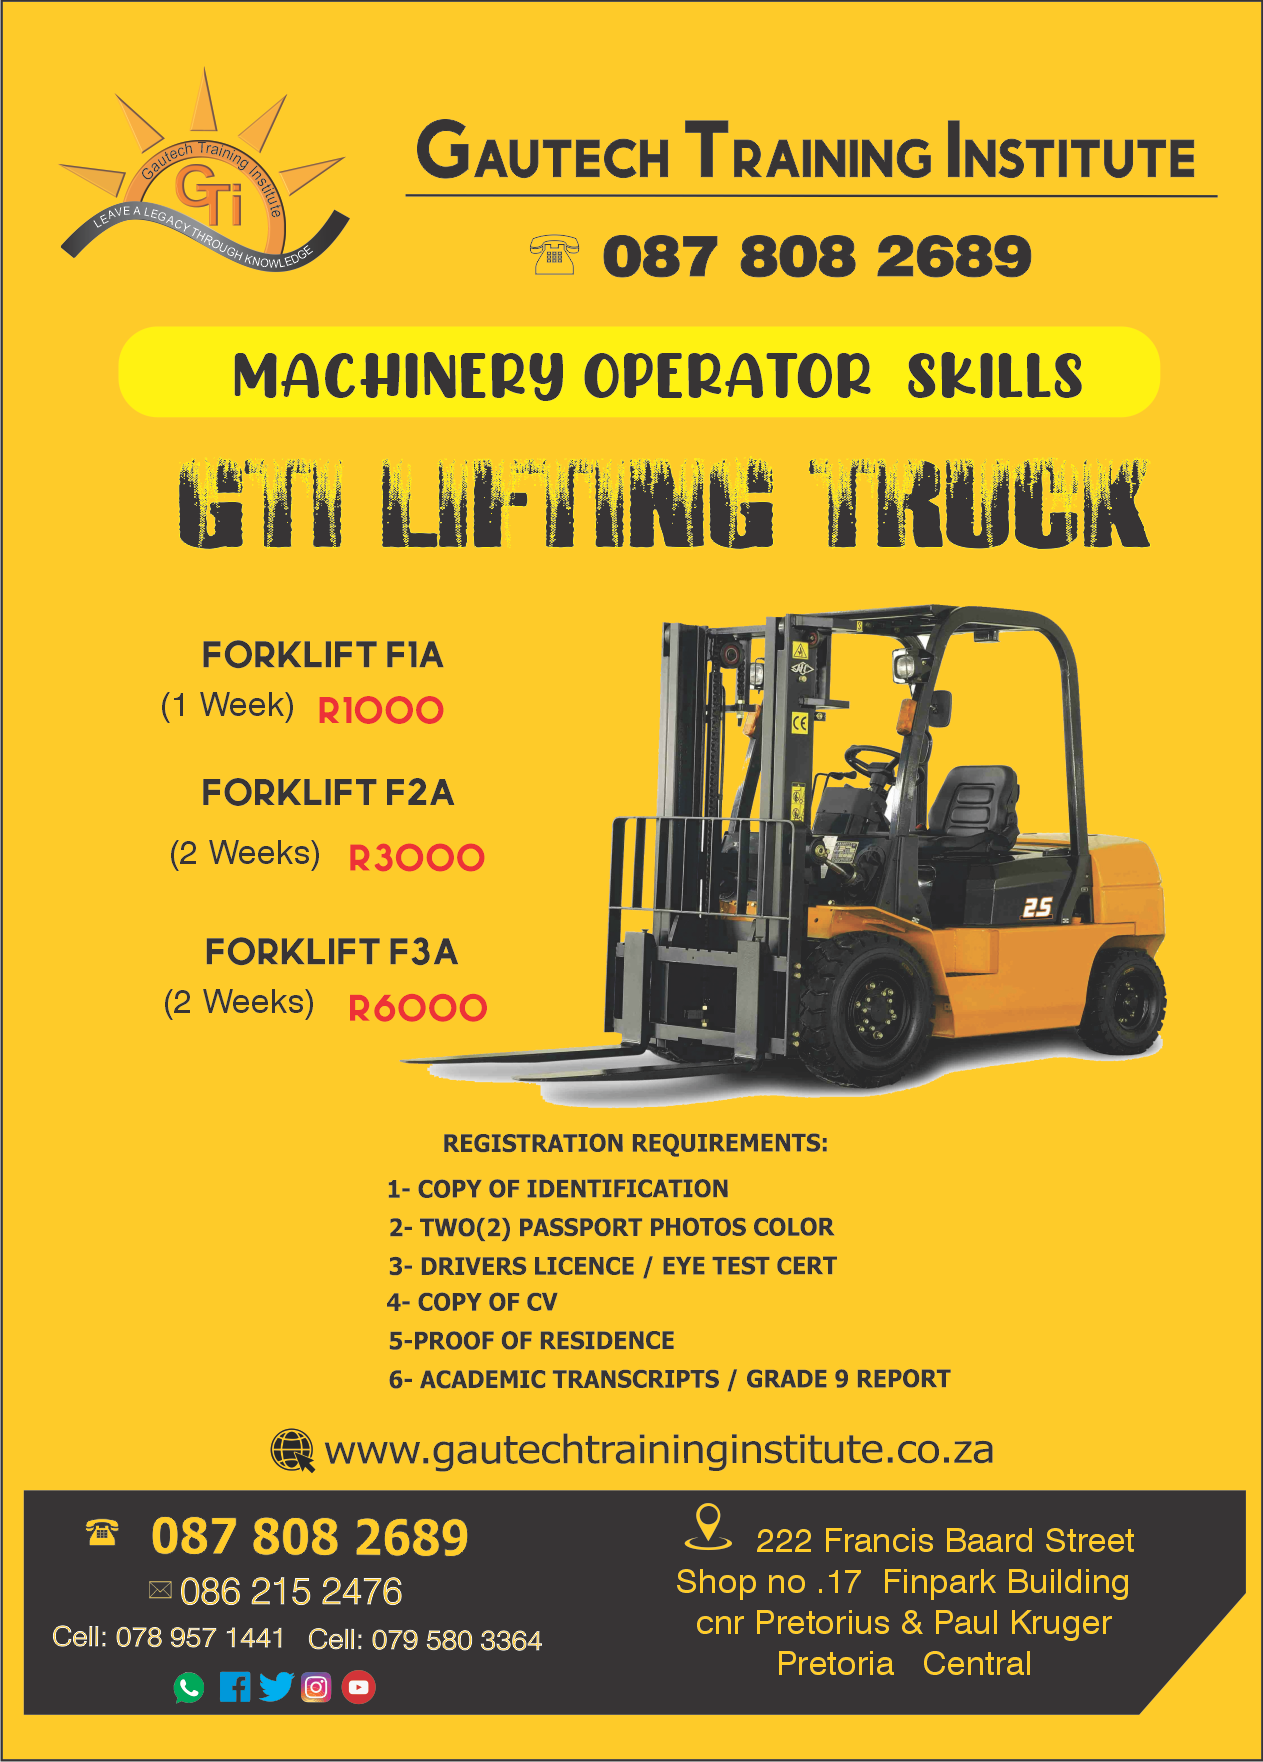 Forklift Training School / Forklift machinery institute We provide Health and Safety forklift training services and forklift licenses. Apply and start at any time for accredited and OHS compliant forklift certification. Our forklift operator training is easy, reliable and convenient. Learners practically operate a forklift before they inspect all components and demonstrate an understanding the functions of the lifting truck. Stacking, Shelving, Maneuvering also starting & shutting down. Code of Practice and operating procedures are also highlighted. Contact us for refresher forklift operator training skills and on-site training at affordable prices here in Pretoria central and Gauteng at large. Forklift Training Course Content Forklift Skills Training Course RPL Types of Lift Trucks As per Code of Practice Parts and Functions of a Forklift or Lift Truck Principles of Operation Code of Practice Lift Truck Safety procedures & SWPs Daily Checkslists and inspection Books Refuelling or Changing Batteries Mechanical Appreciation & Maintenance Log Books